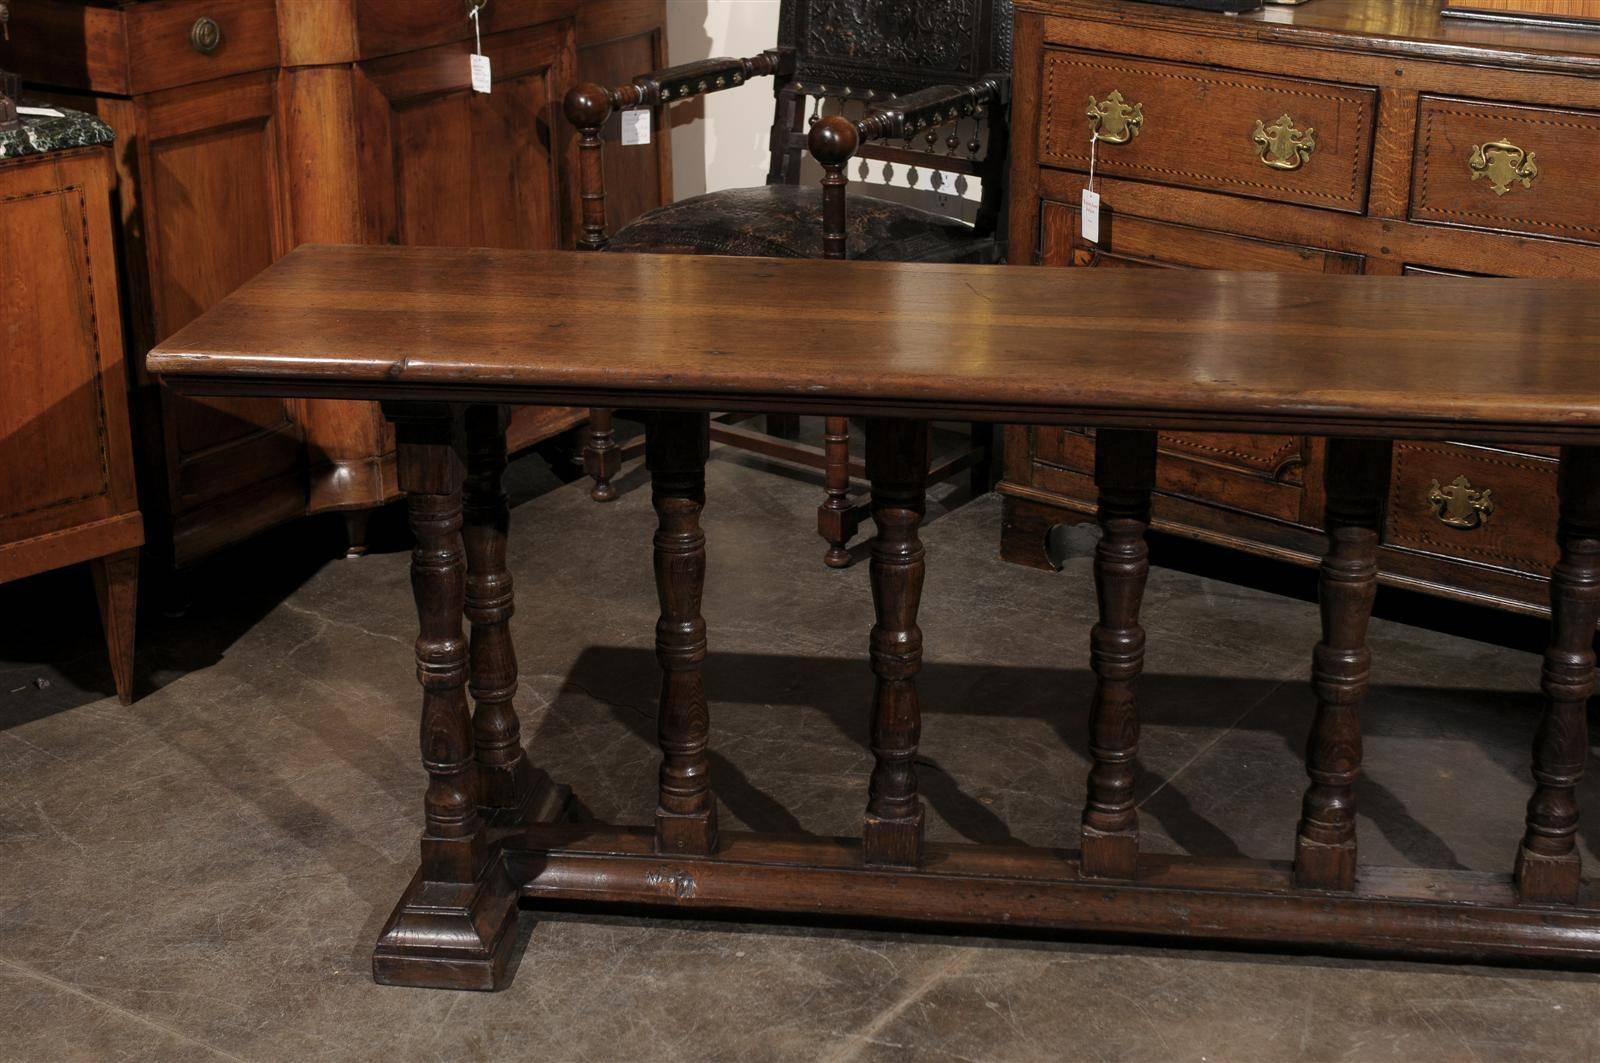 This Italian walnut long side or console table from the early 19th century features a narrow rectangular top over and unusual trestle base. The turned legs, placed on each side of the table, are rhythmically repeated along the cross stretcher. No